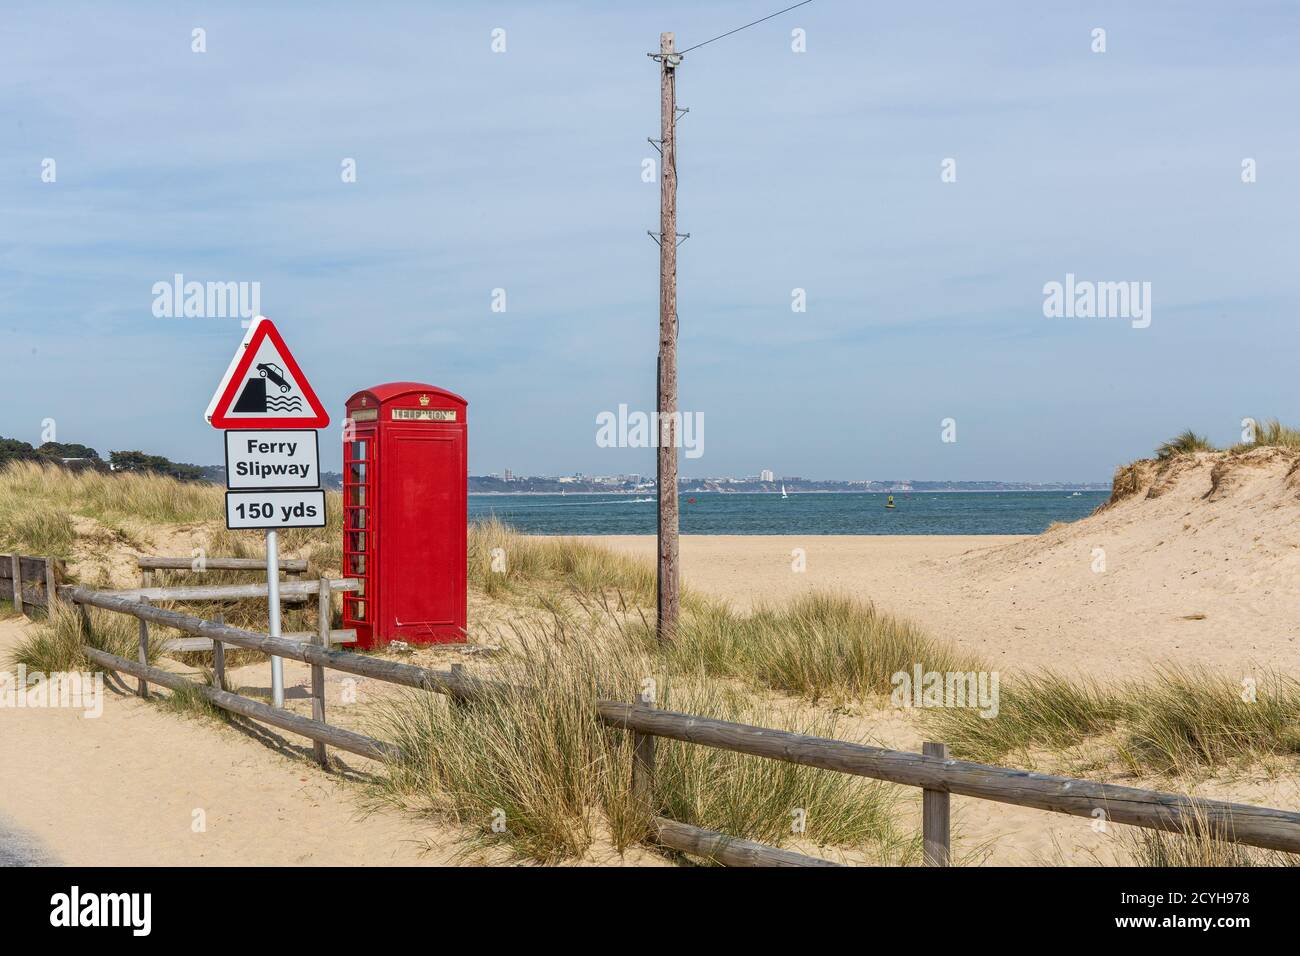 A telegraph pole, phone box and a sign saying 150 years to the ferry slipway nestle in the sand dunes on the slip road to the car ferry across Poole H Stock Photo